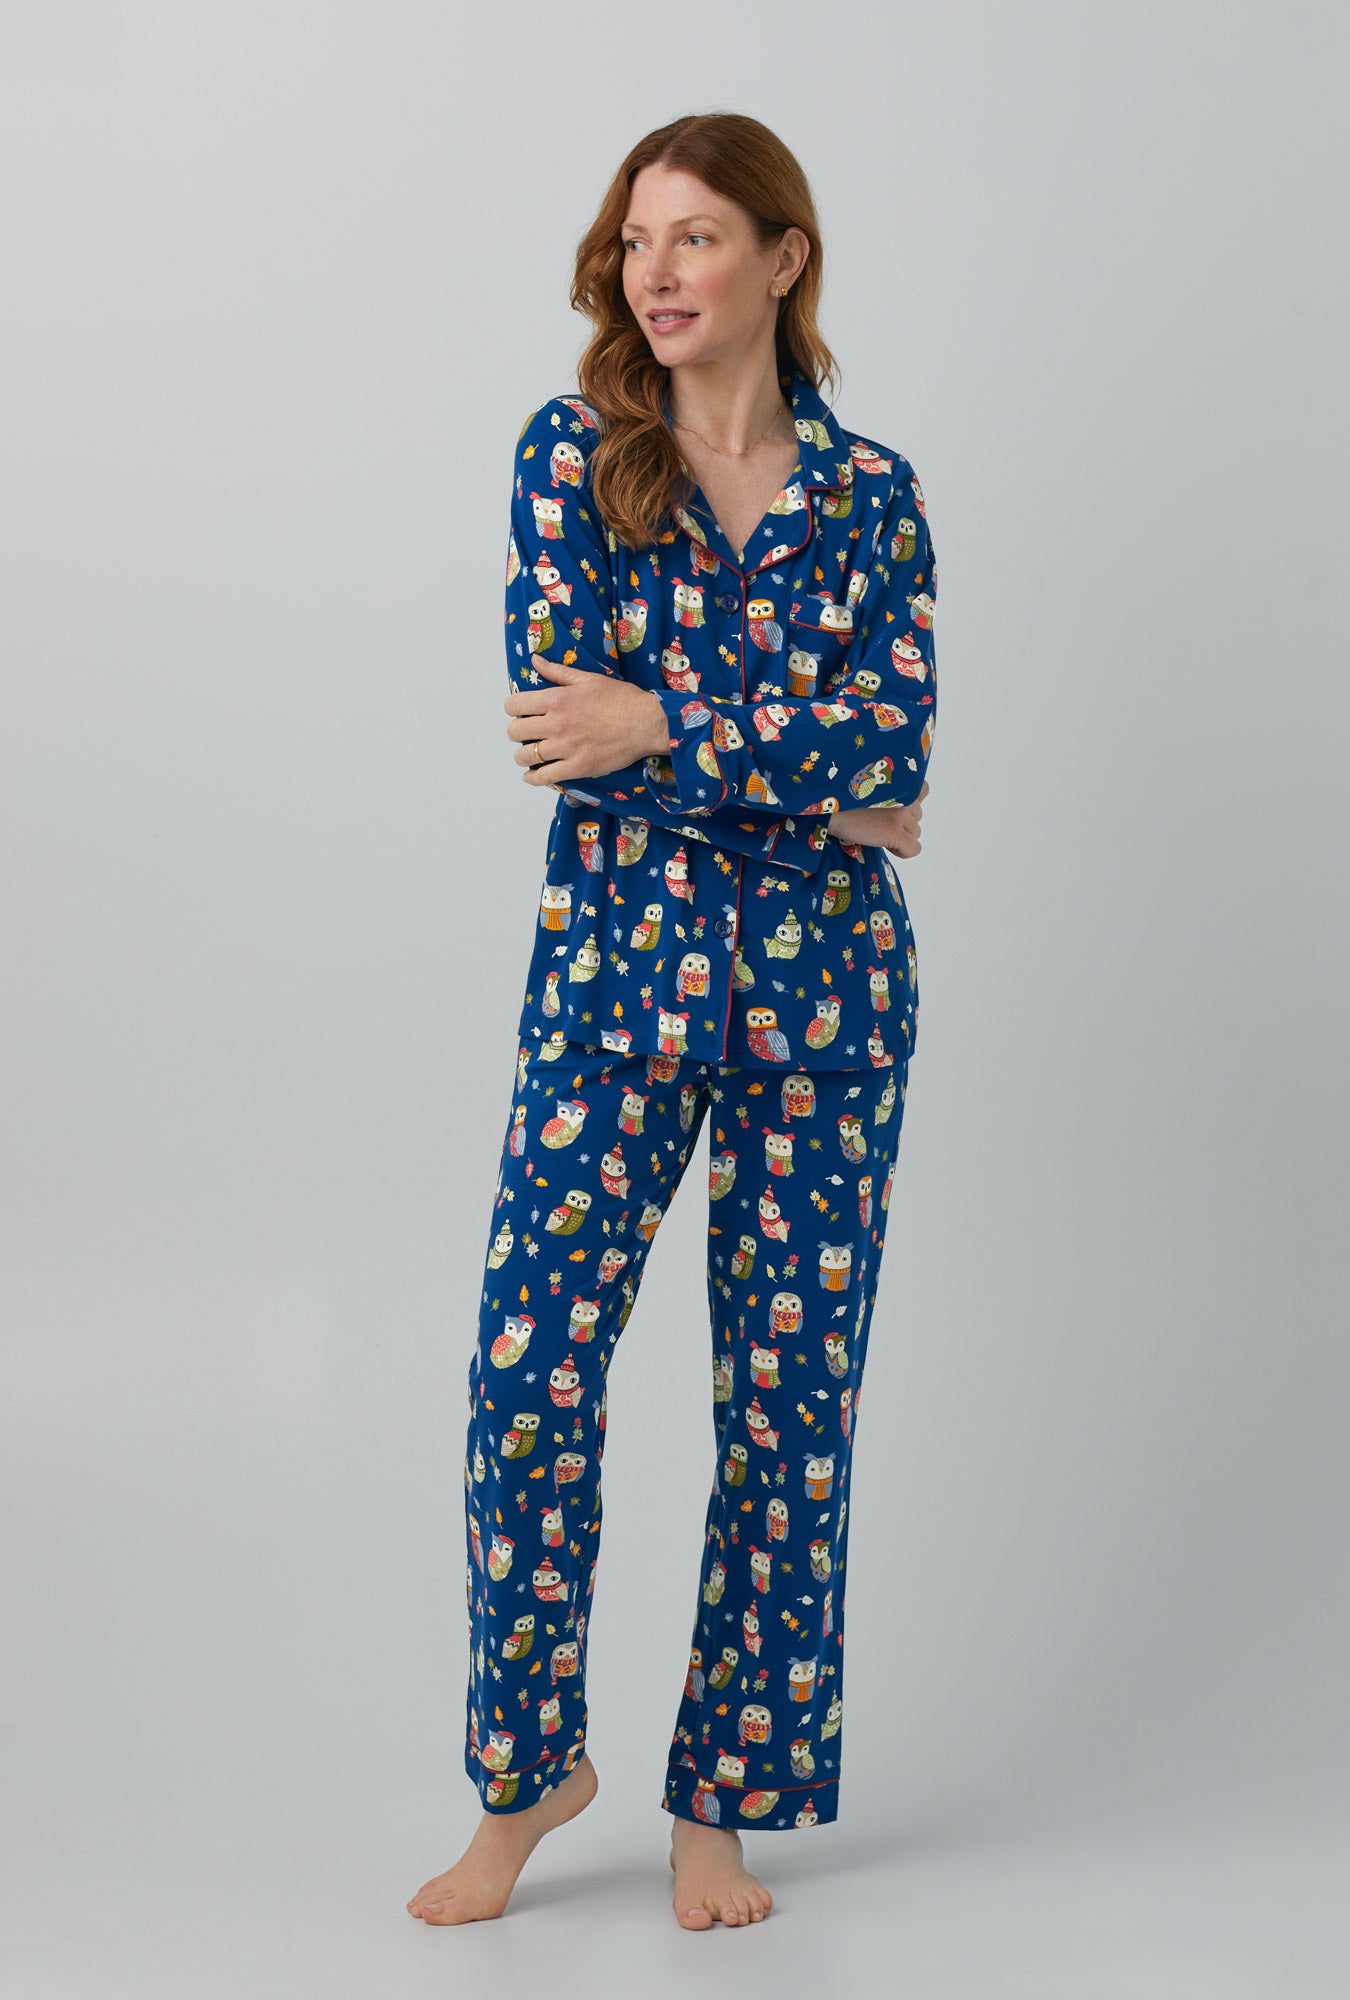 A lady wearing Long Sleeve Classic Stretch Jersey PJ Set with autumn owls print